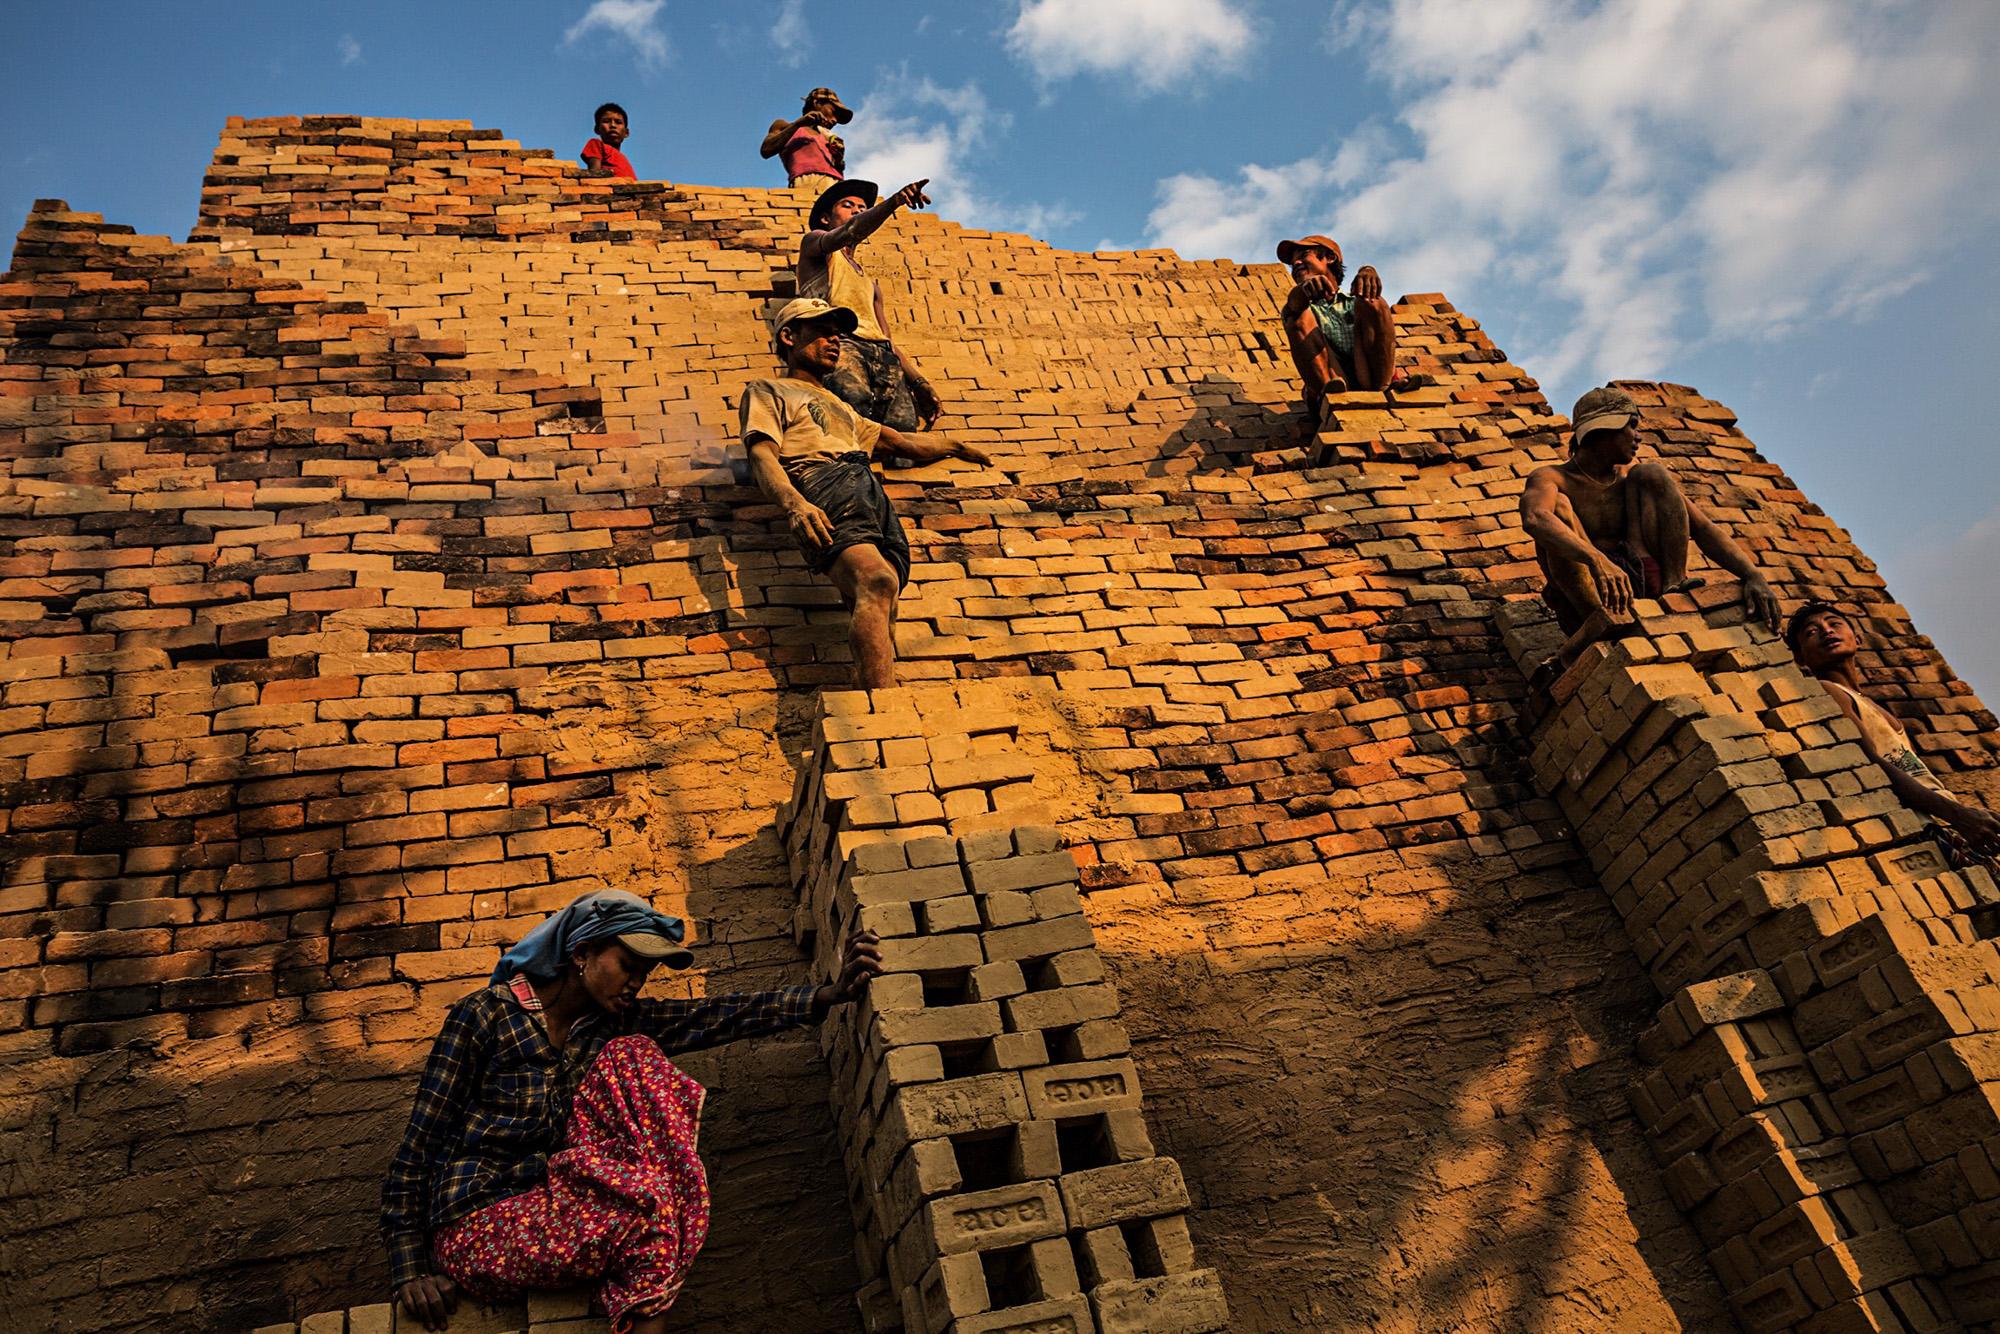  Workers stand on the face of a brick kiln in order to move bricks from the bottom to the to the top of the kiln, on the outskirts of Yangon, Myanmar, January 2015. 